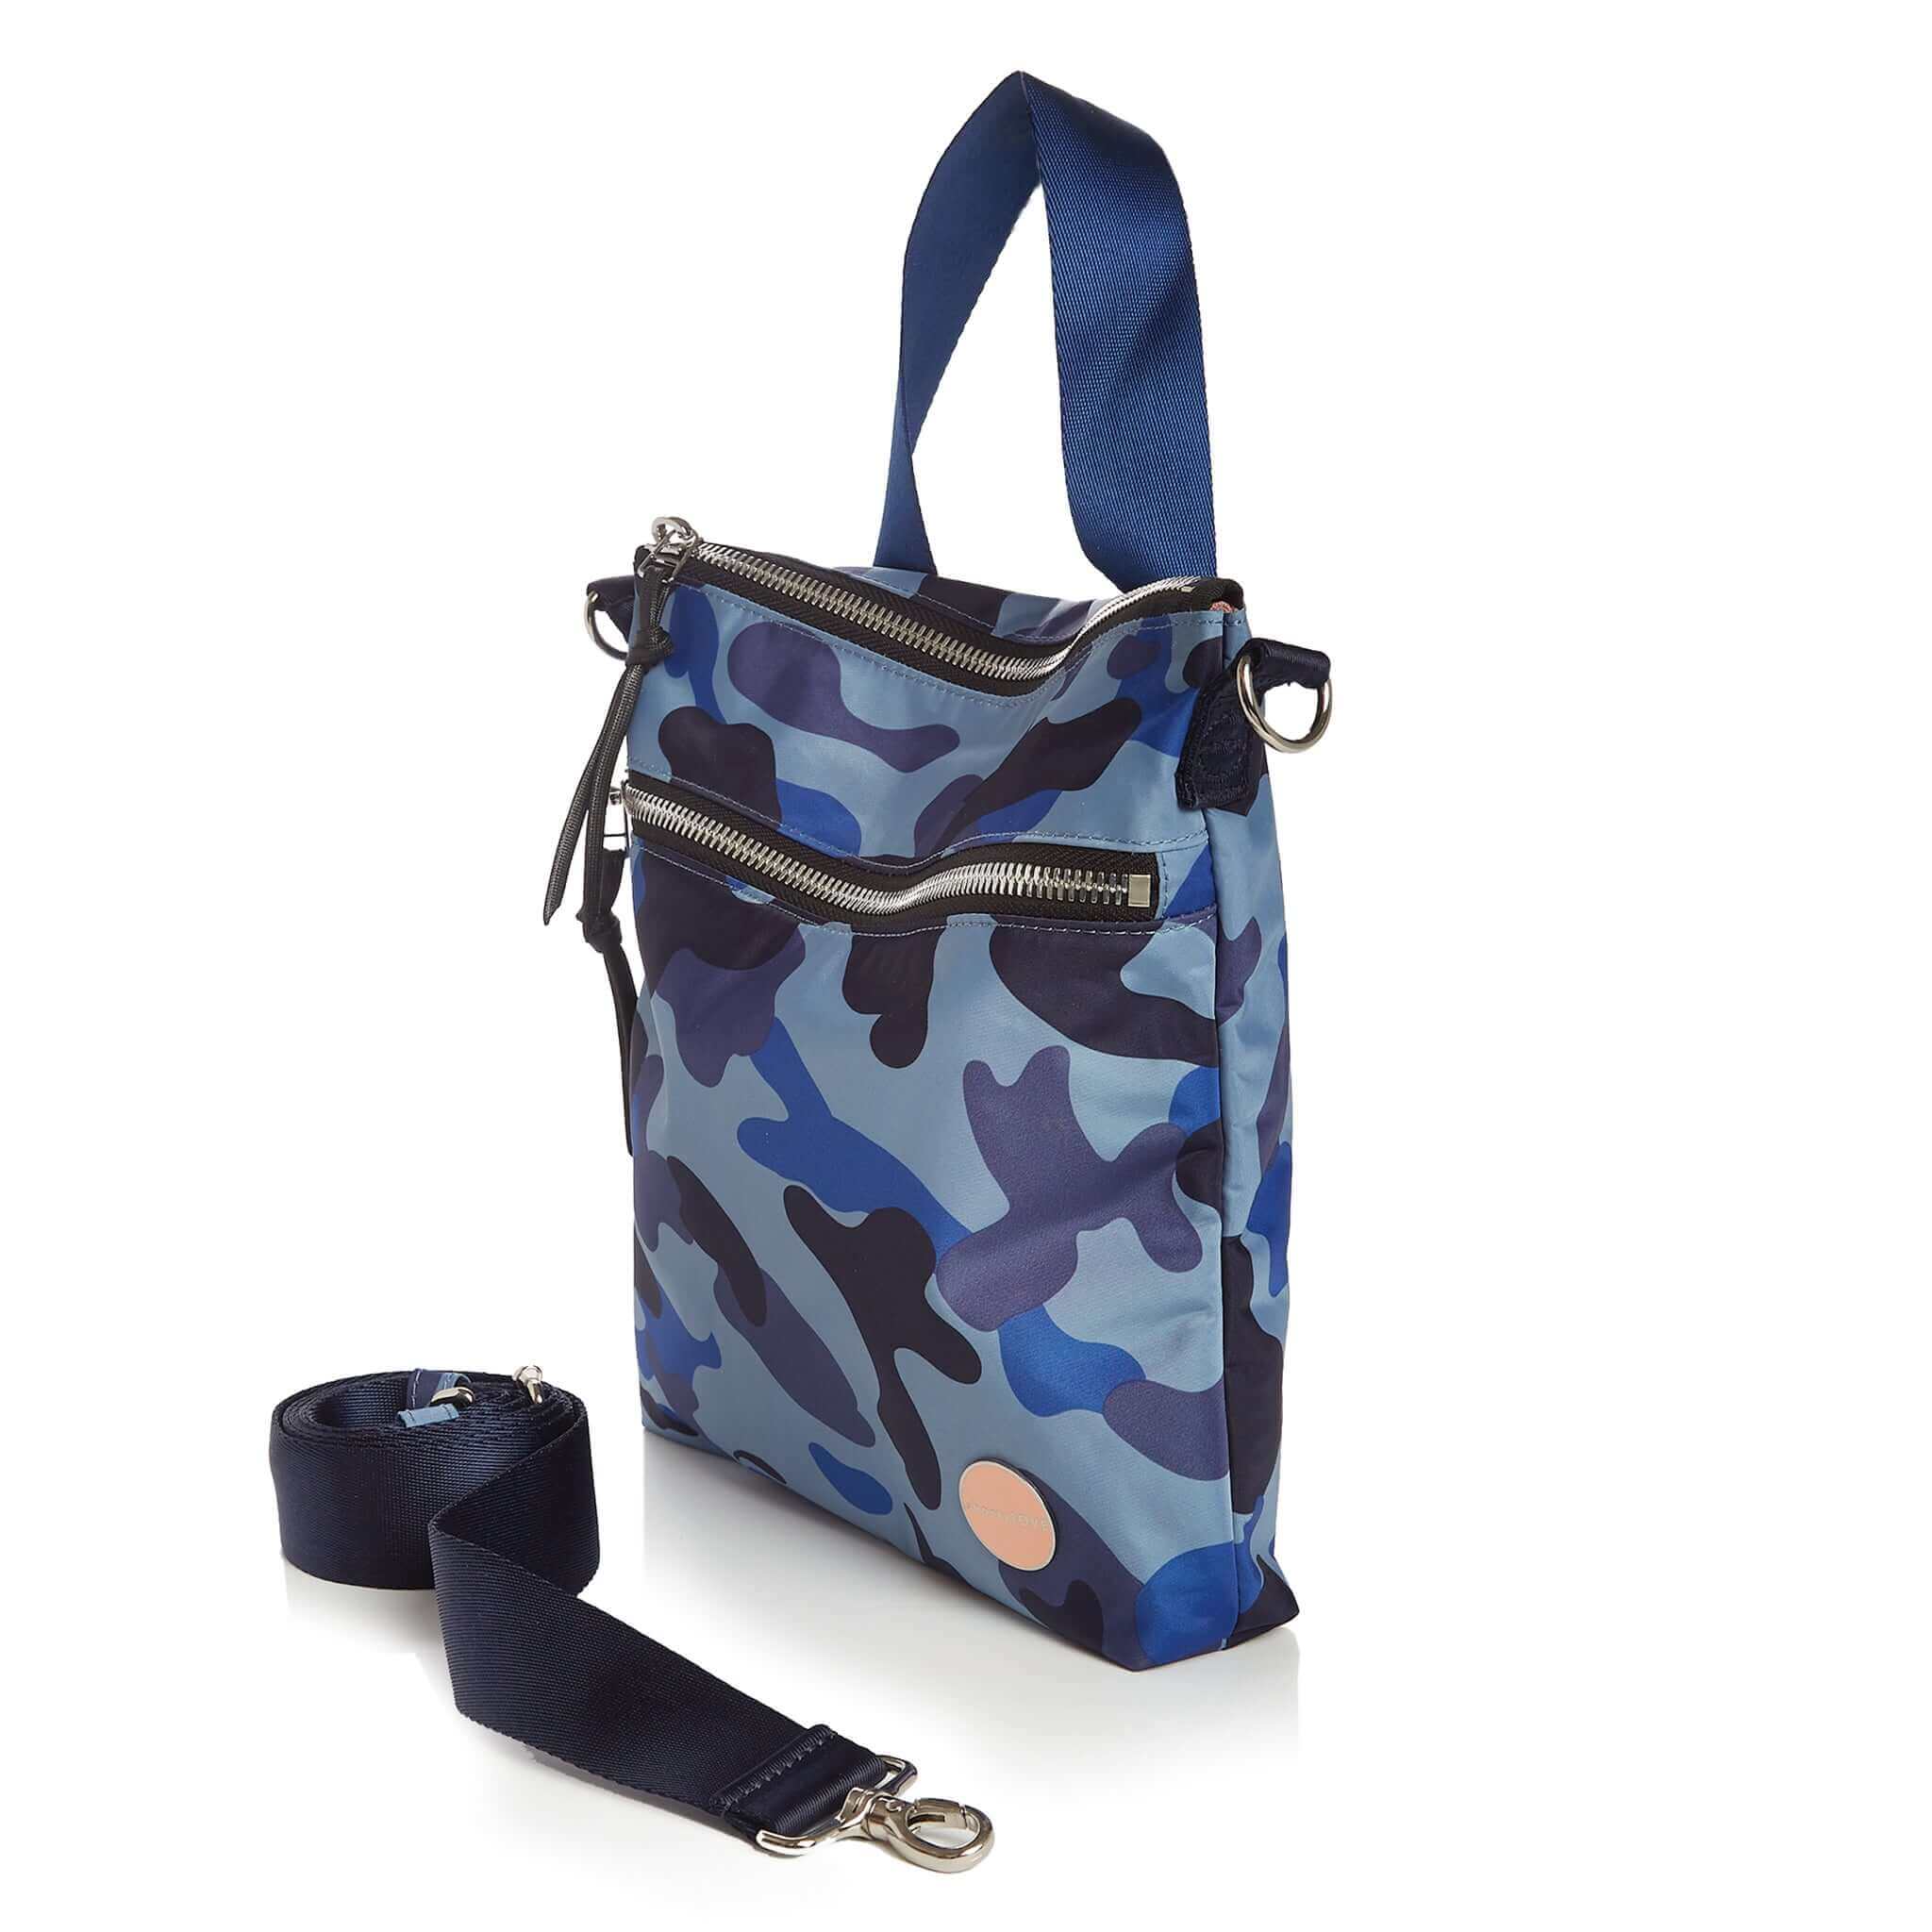 The Casual Crossbody in Spruce Camo | Bags & Accessories | Rothy's